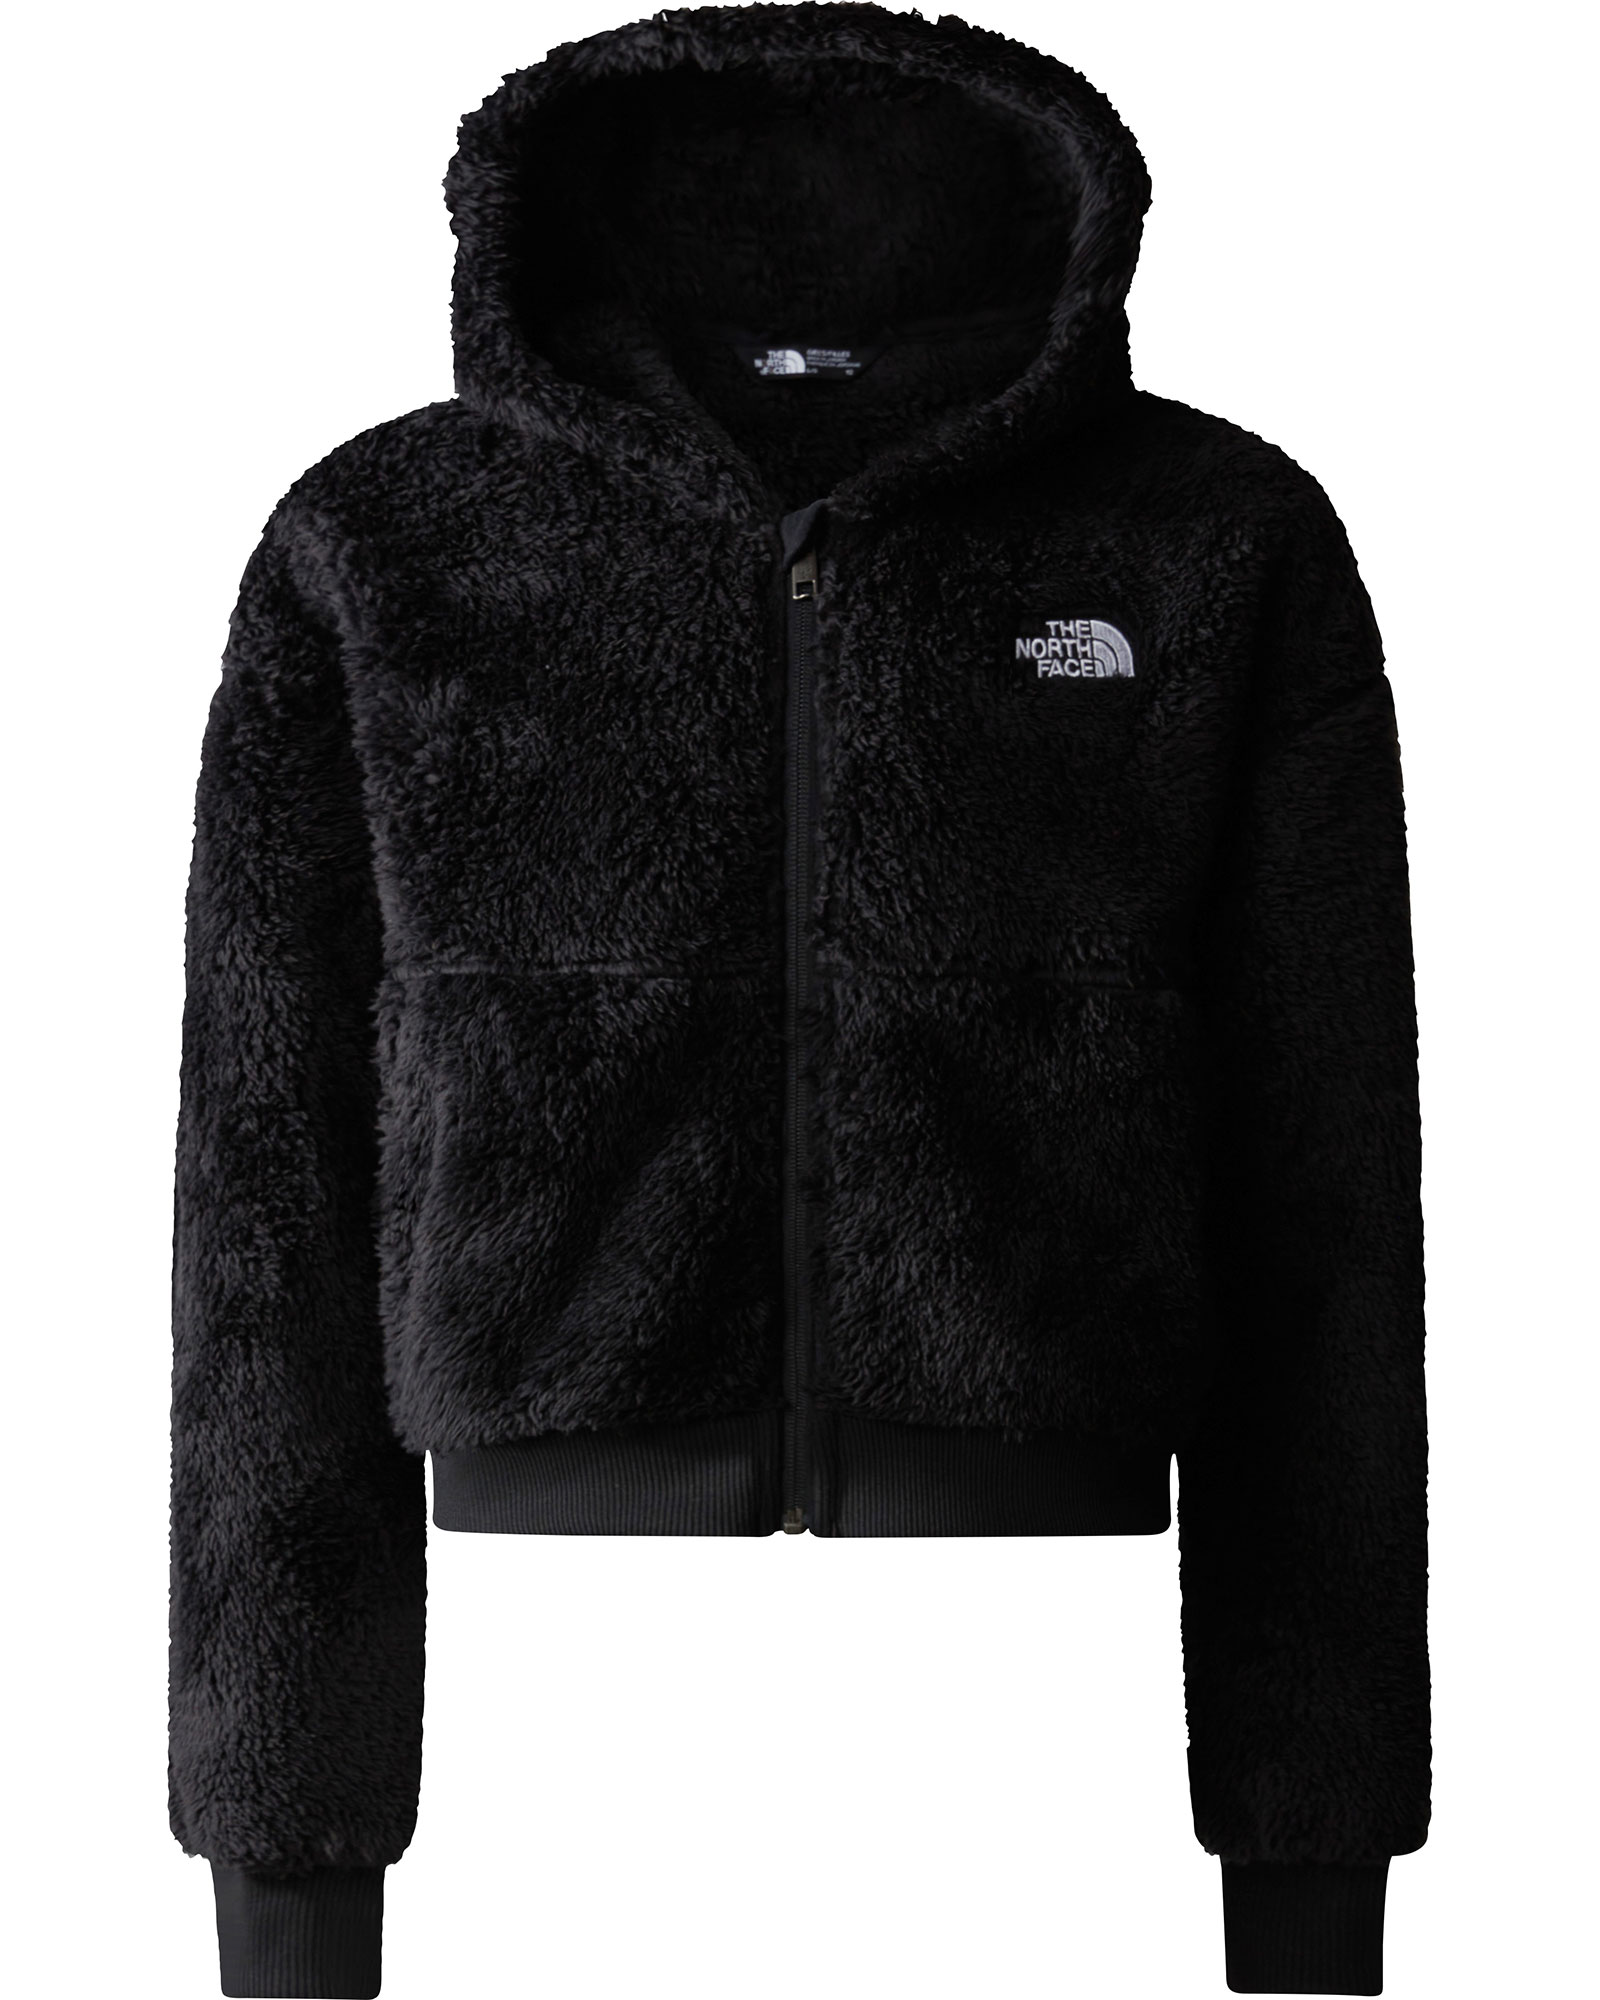 The North Face Girl’s Suave Oso FZ Hooded Jacket - TNF Black XXL